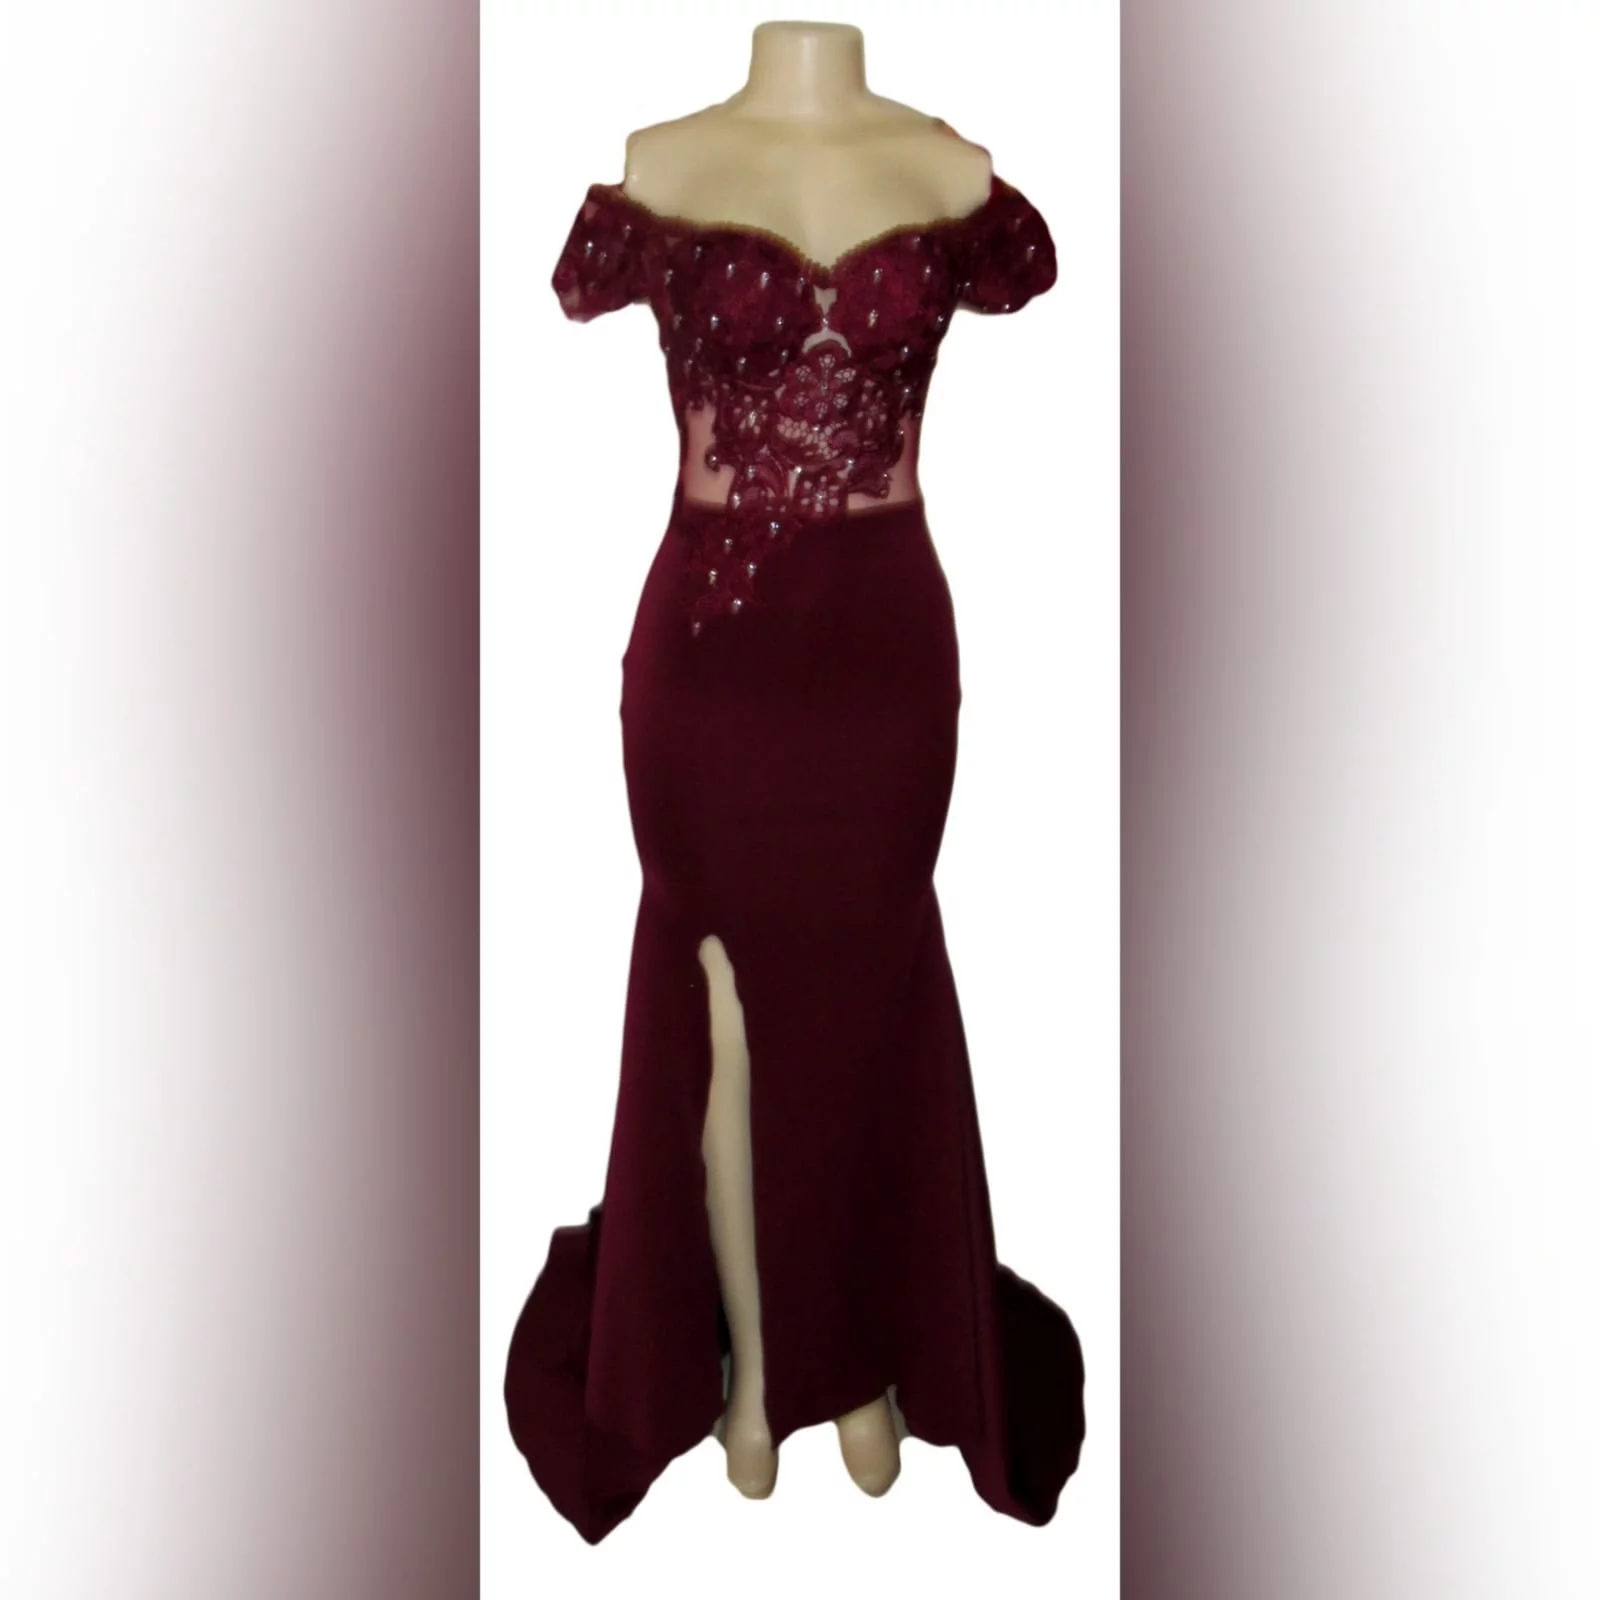 Burgundy off shoulder long matric dance dress 2 burgundy off shoulder long matric dance dress. With an illusion bodice detailed with lace and beads and off-shoulder short sleeves. Bottom fitted till hip, with a high slit and a train for a touch of sexy and drama.